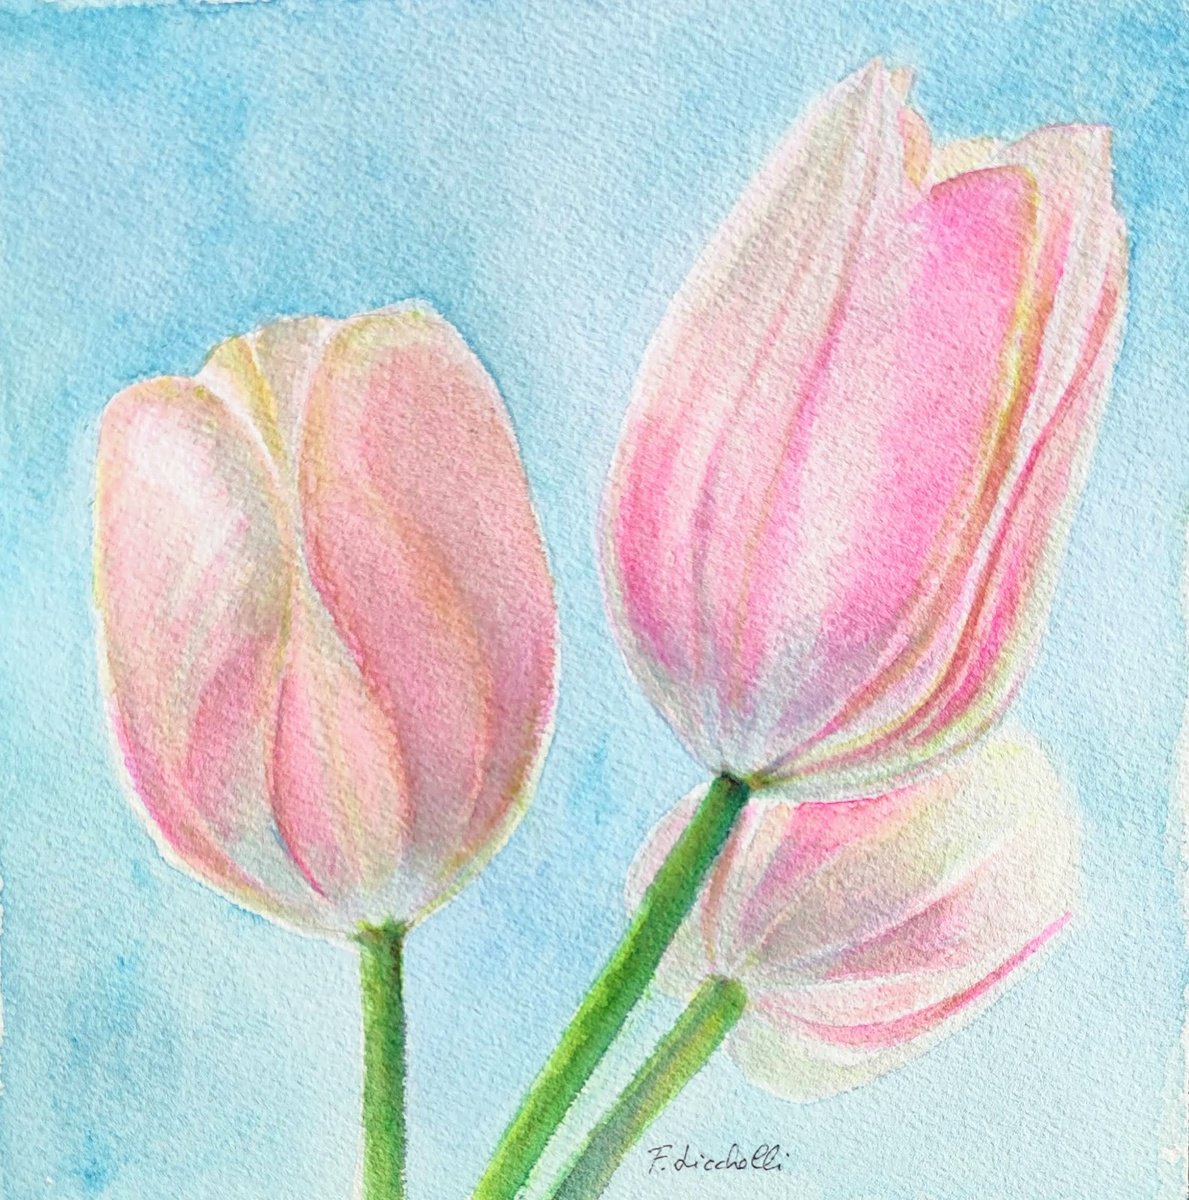 Pink tulips by Francesca Licchelli